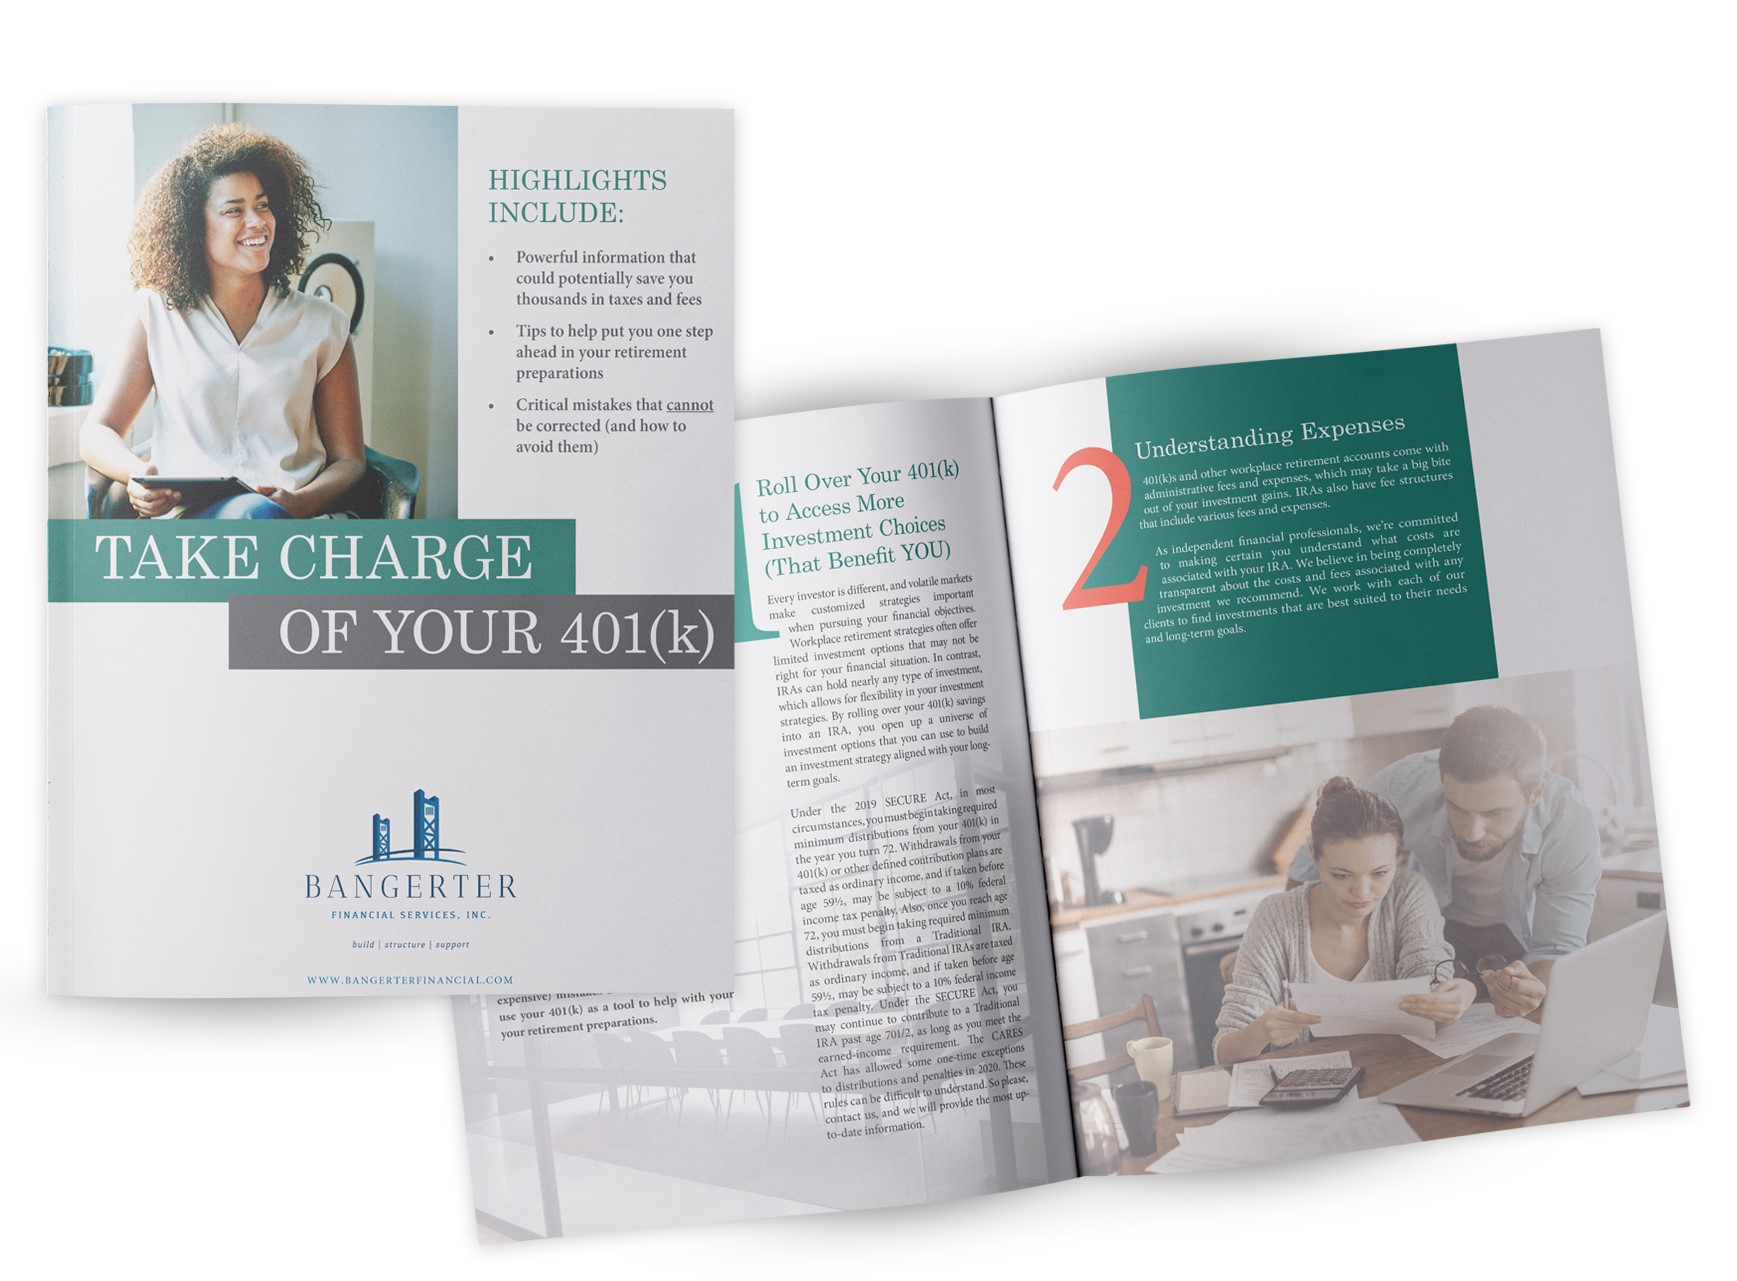 Take Charge of Your 401(k) Whitepaper Download